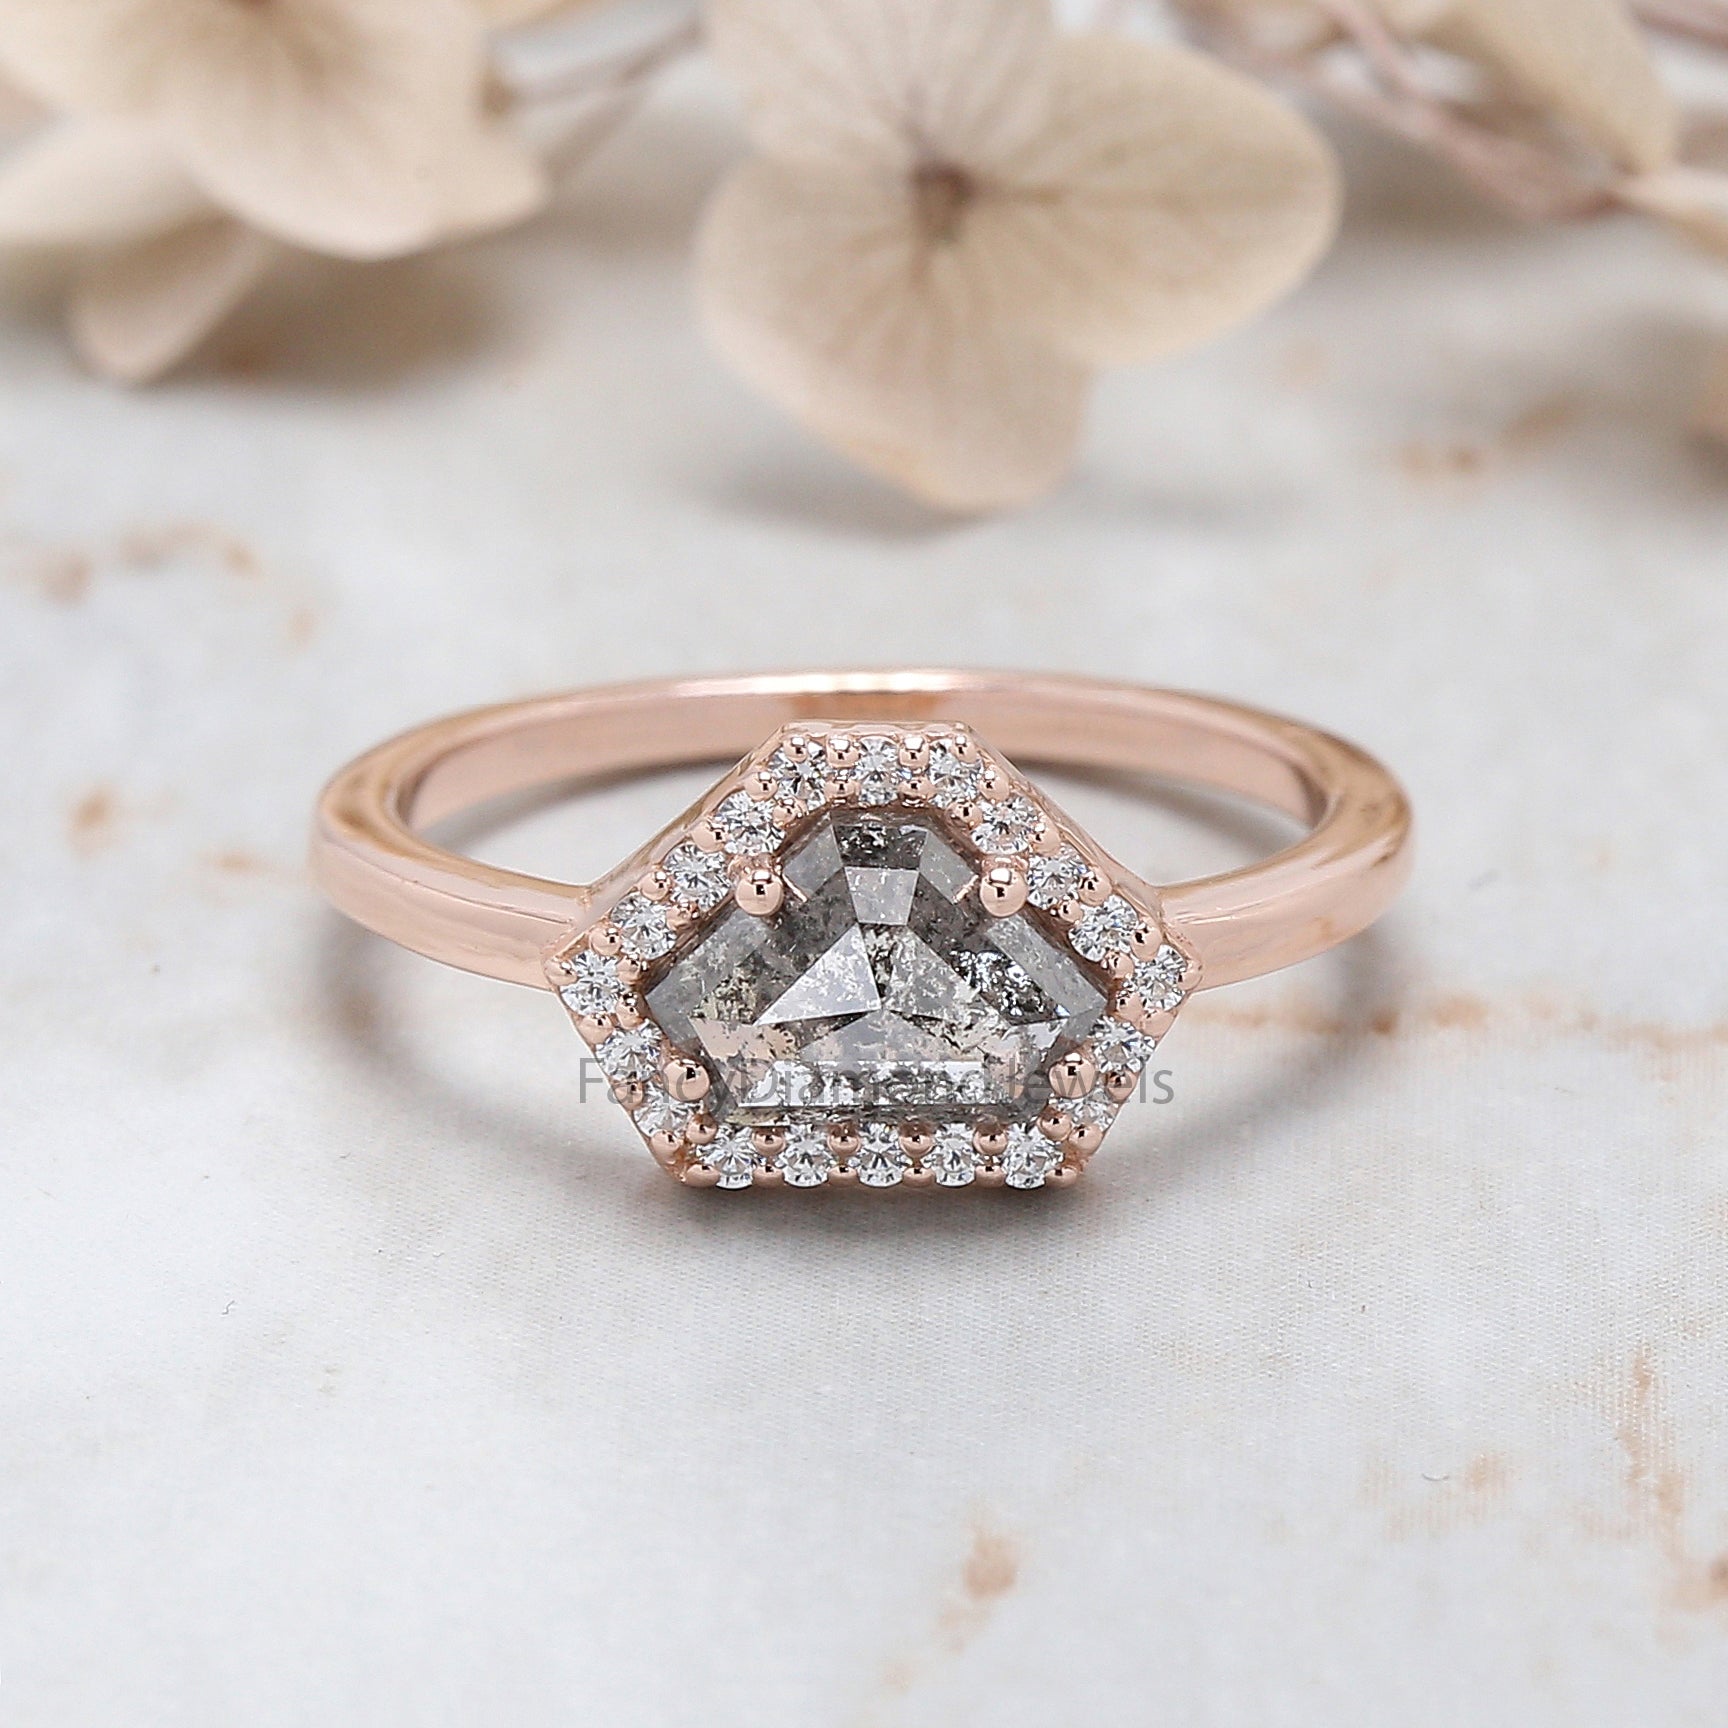 Shield Cut Salt And Pepper Diamond Ring 1.09 Ct 5.45 MM Shield Diamond Ring 14K Solid Rose Gold Silver Engagement Ring Gift For Her QL253